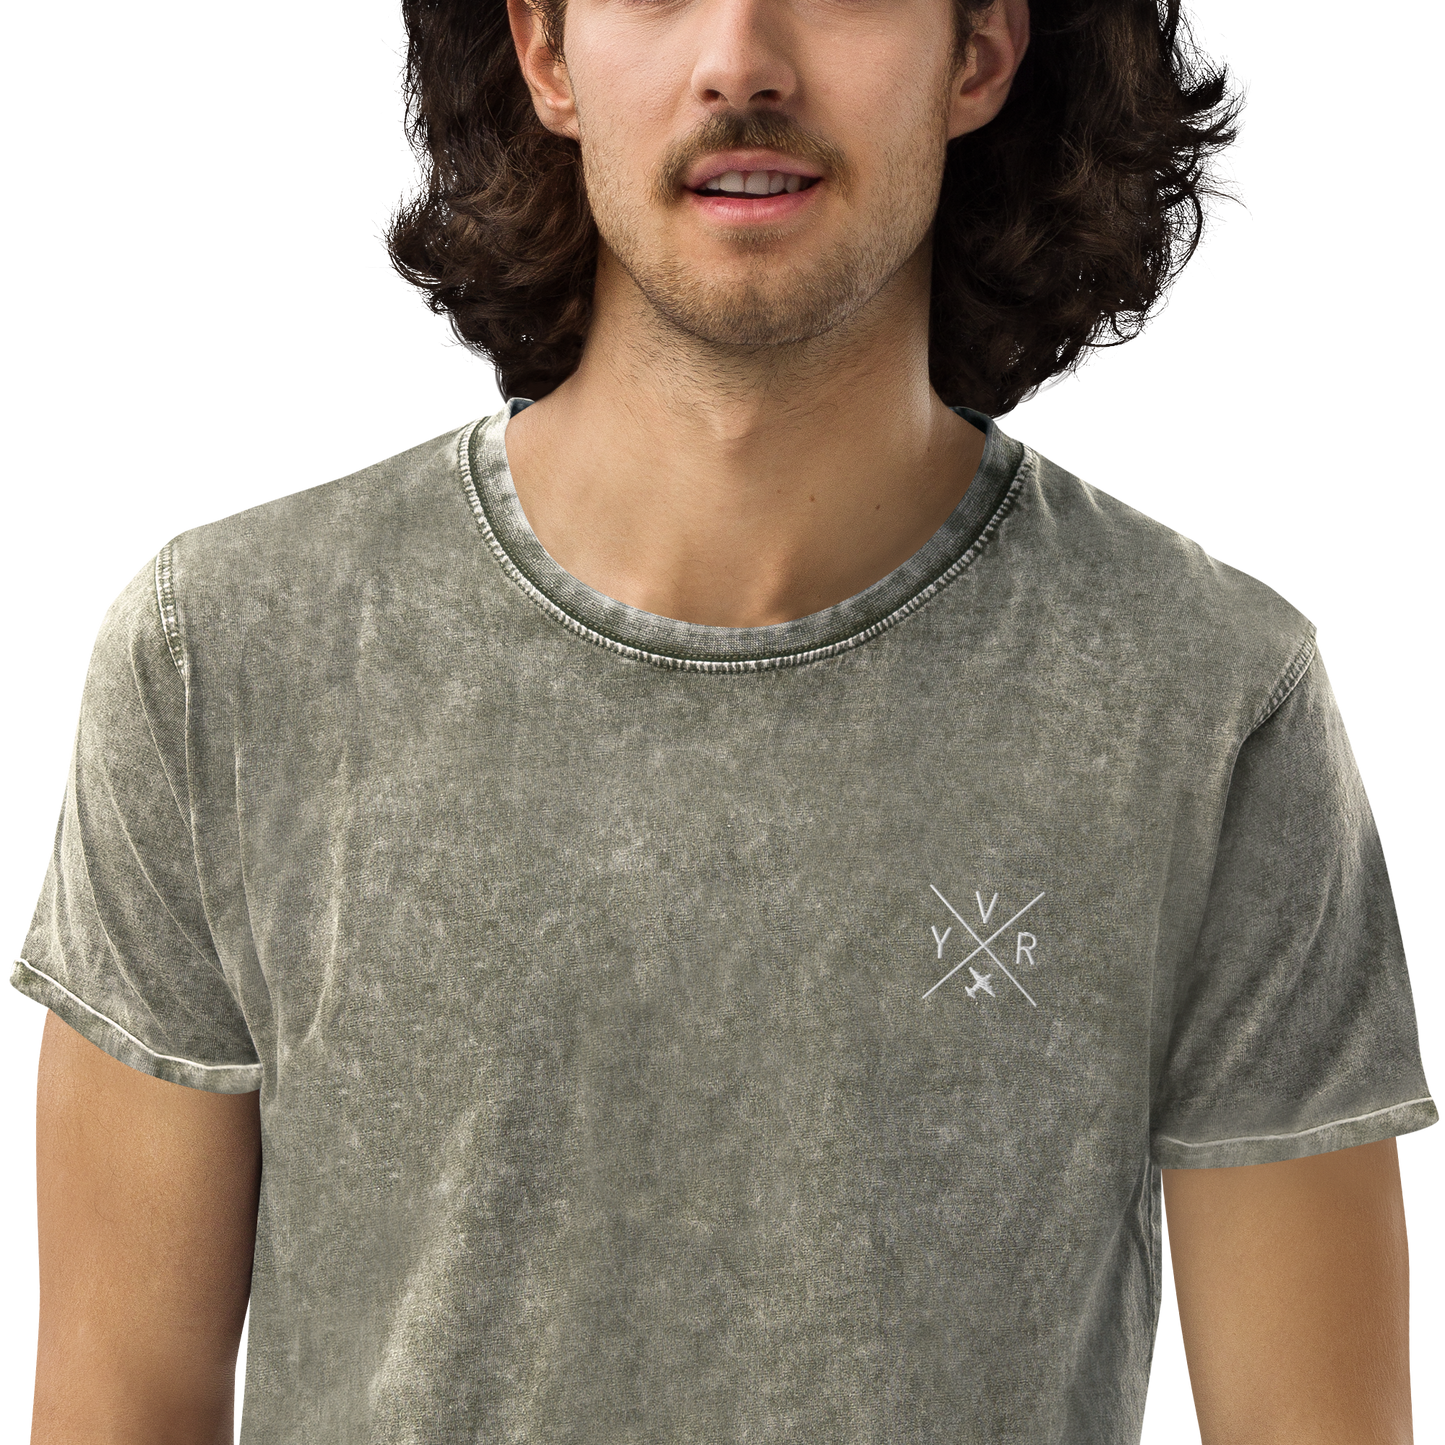 YHM Designs - YVR Vancouver Denim T-Shirt - Crossed-X Design with Airport Code and Vintage Propliner - White Embroidery - Image 11